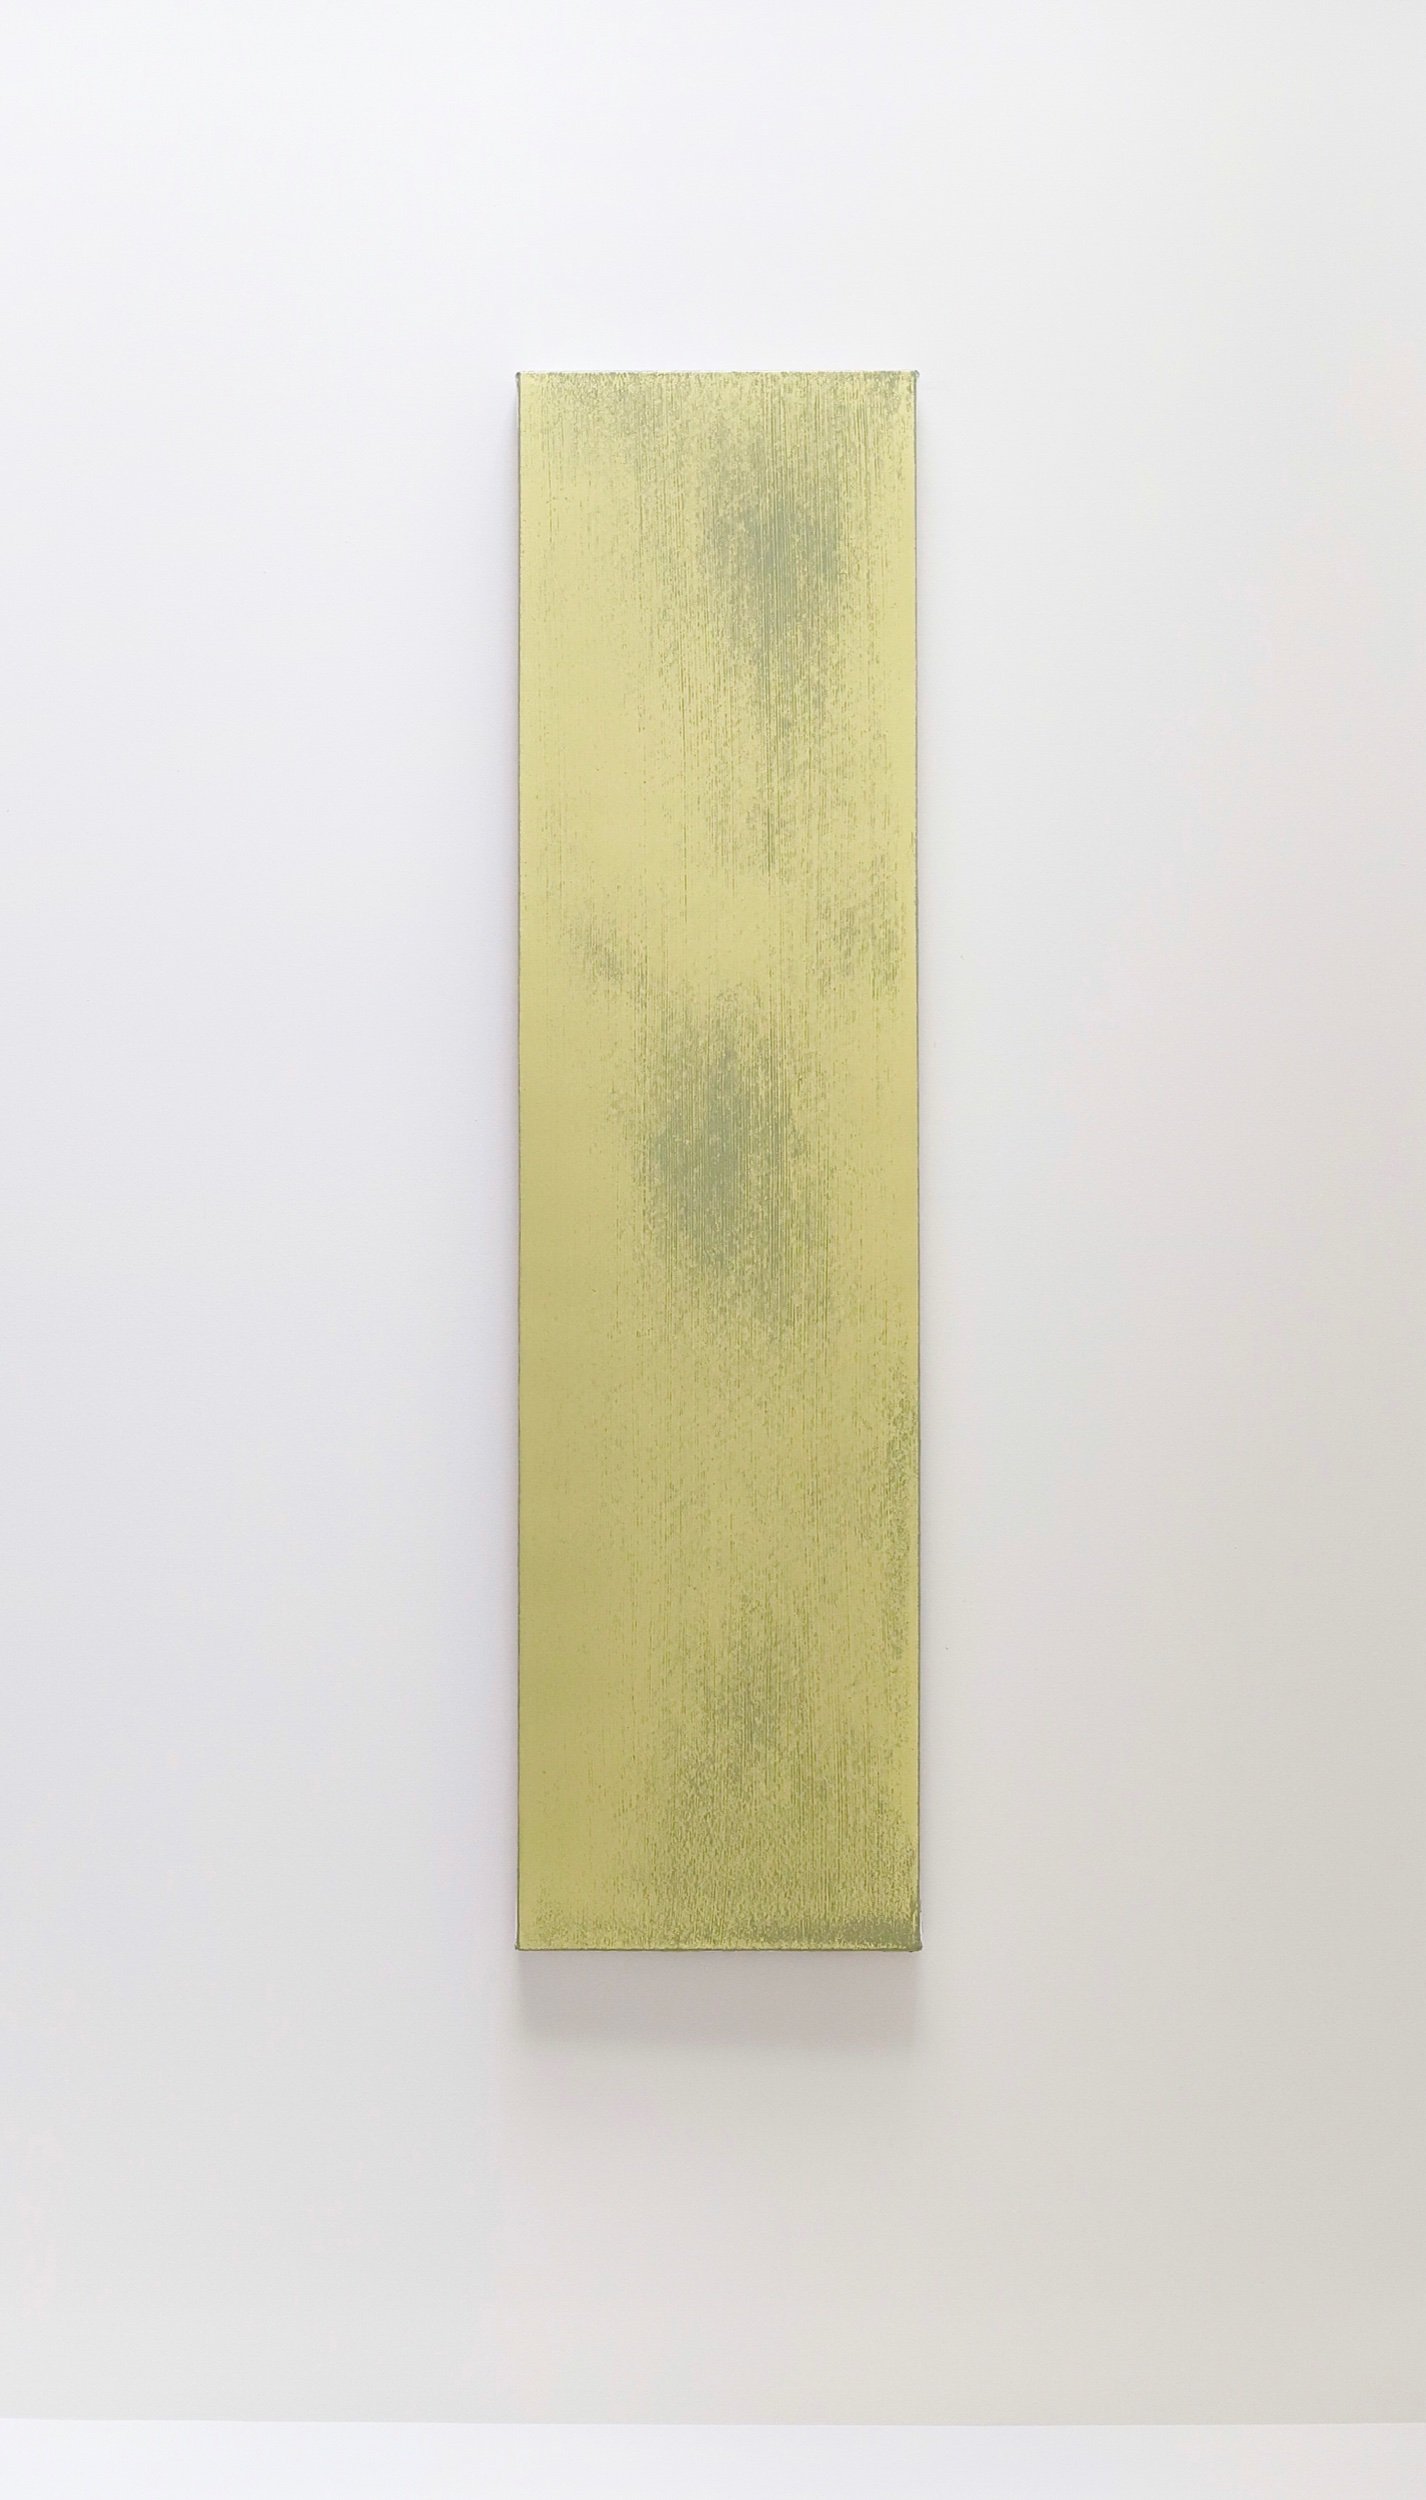  Figuration 22. 10 (Physical Absence), oil on canvas, 124x31cm, 2022 